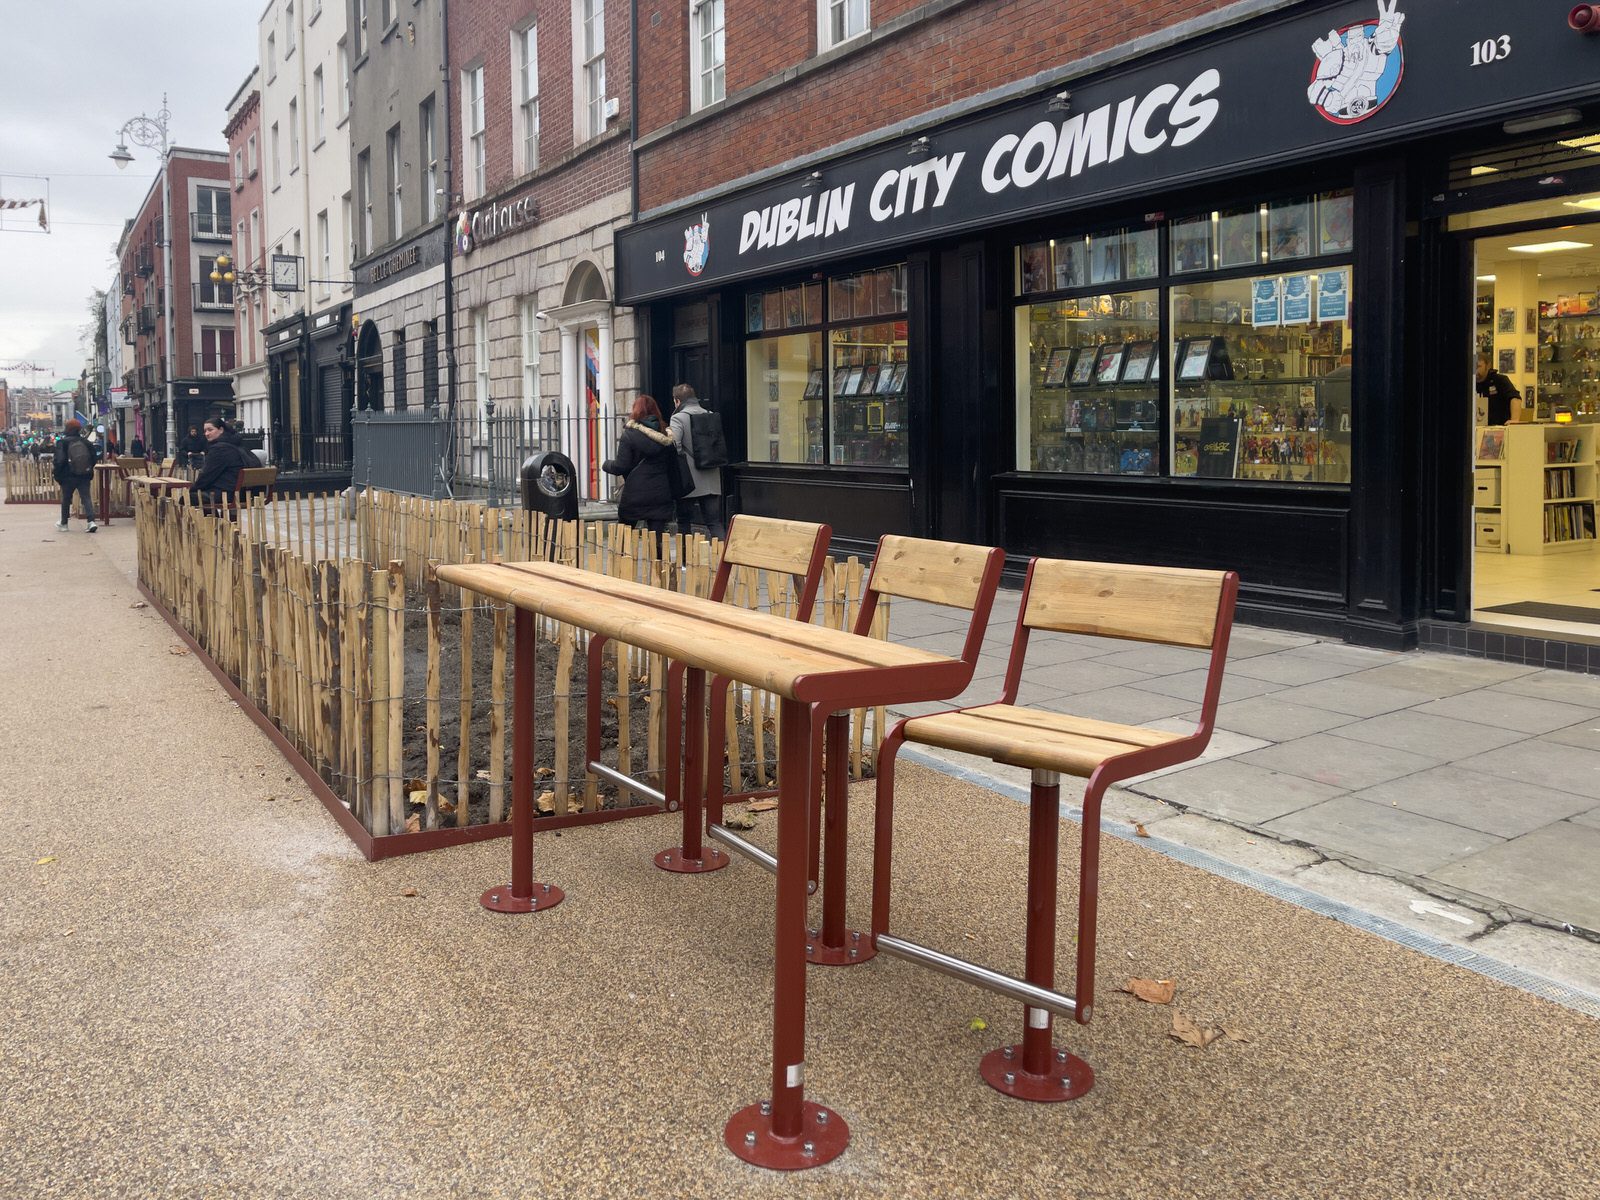 THE NEW STREET FURNITURE IS BEING INSTALLED ON CAPEL STREET [BUT THERE ARE FEW VISITORS TO BE SEEN TODAY]-225418-1